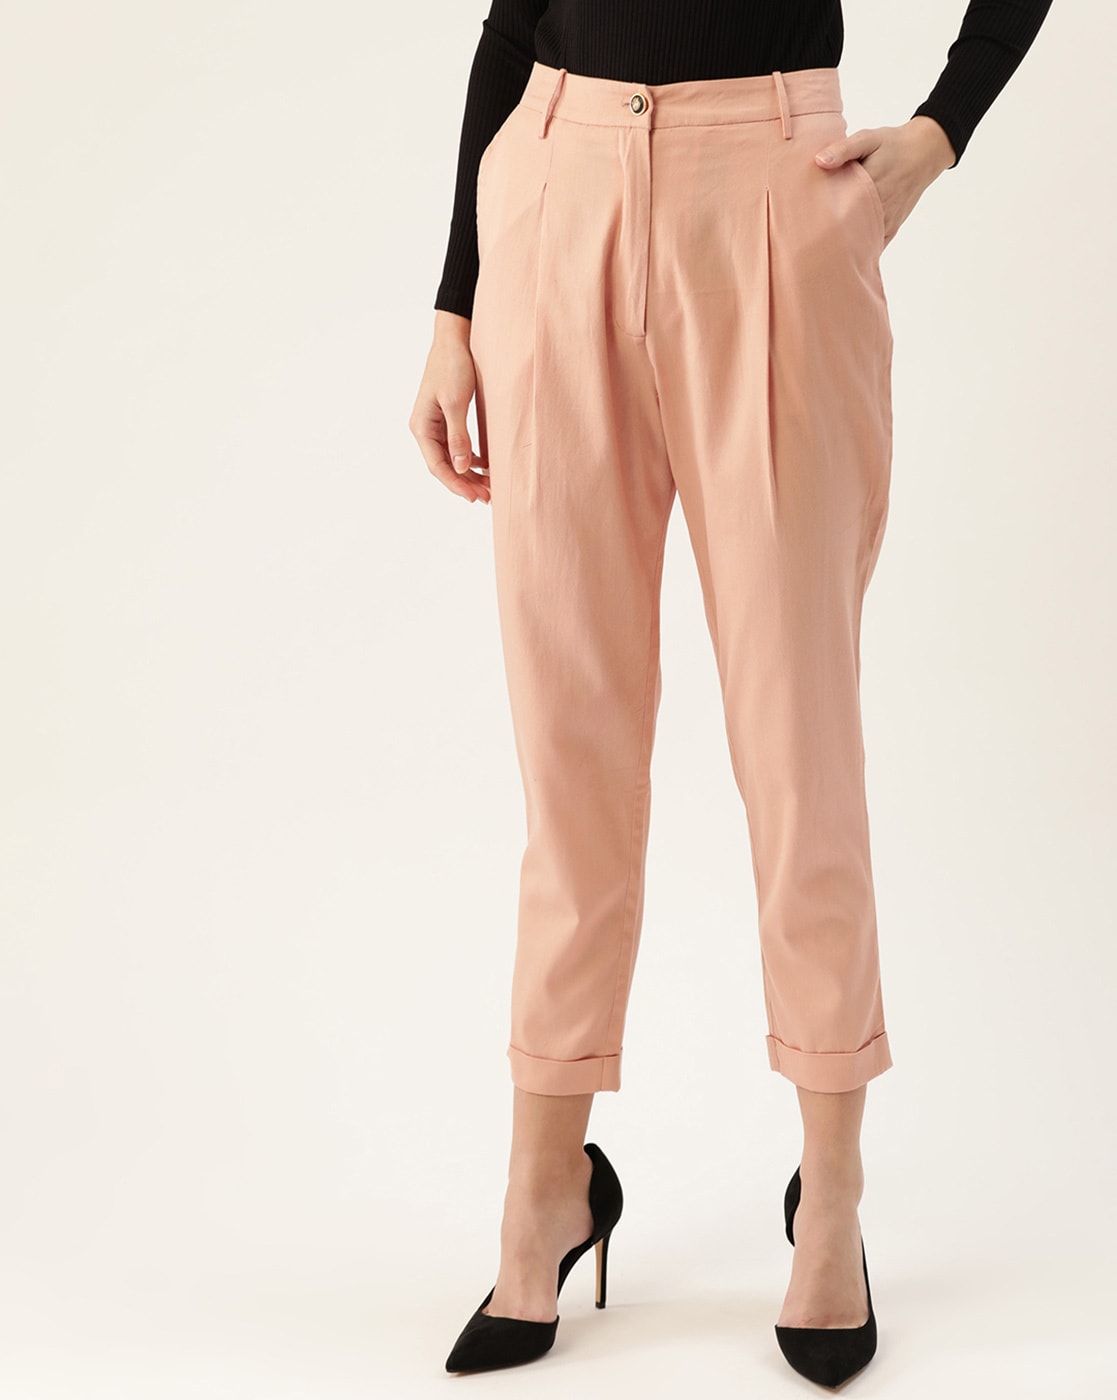 Buy Peach Trousers & Pants for Women by MADAME Online | Ajio.com